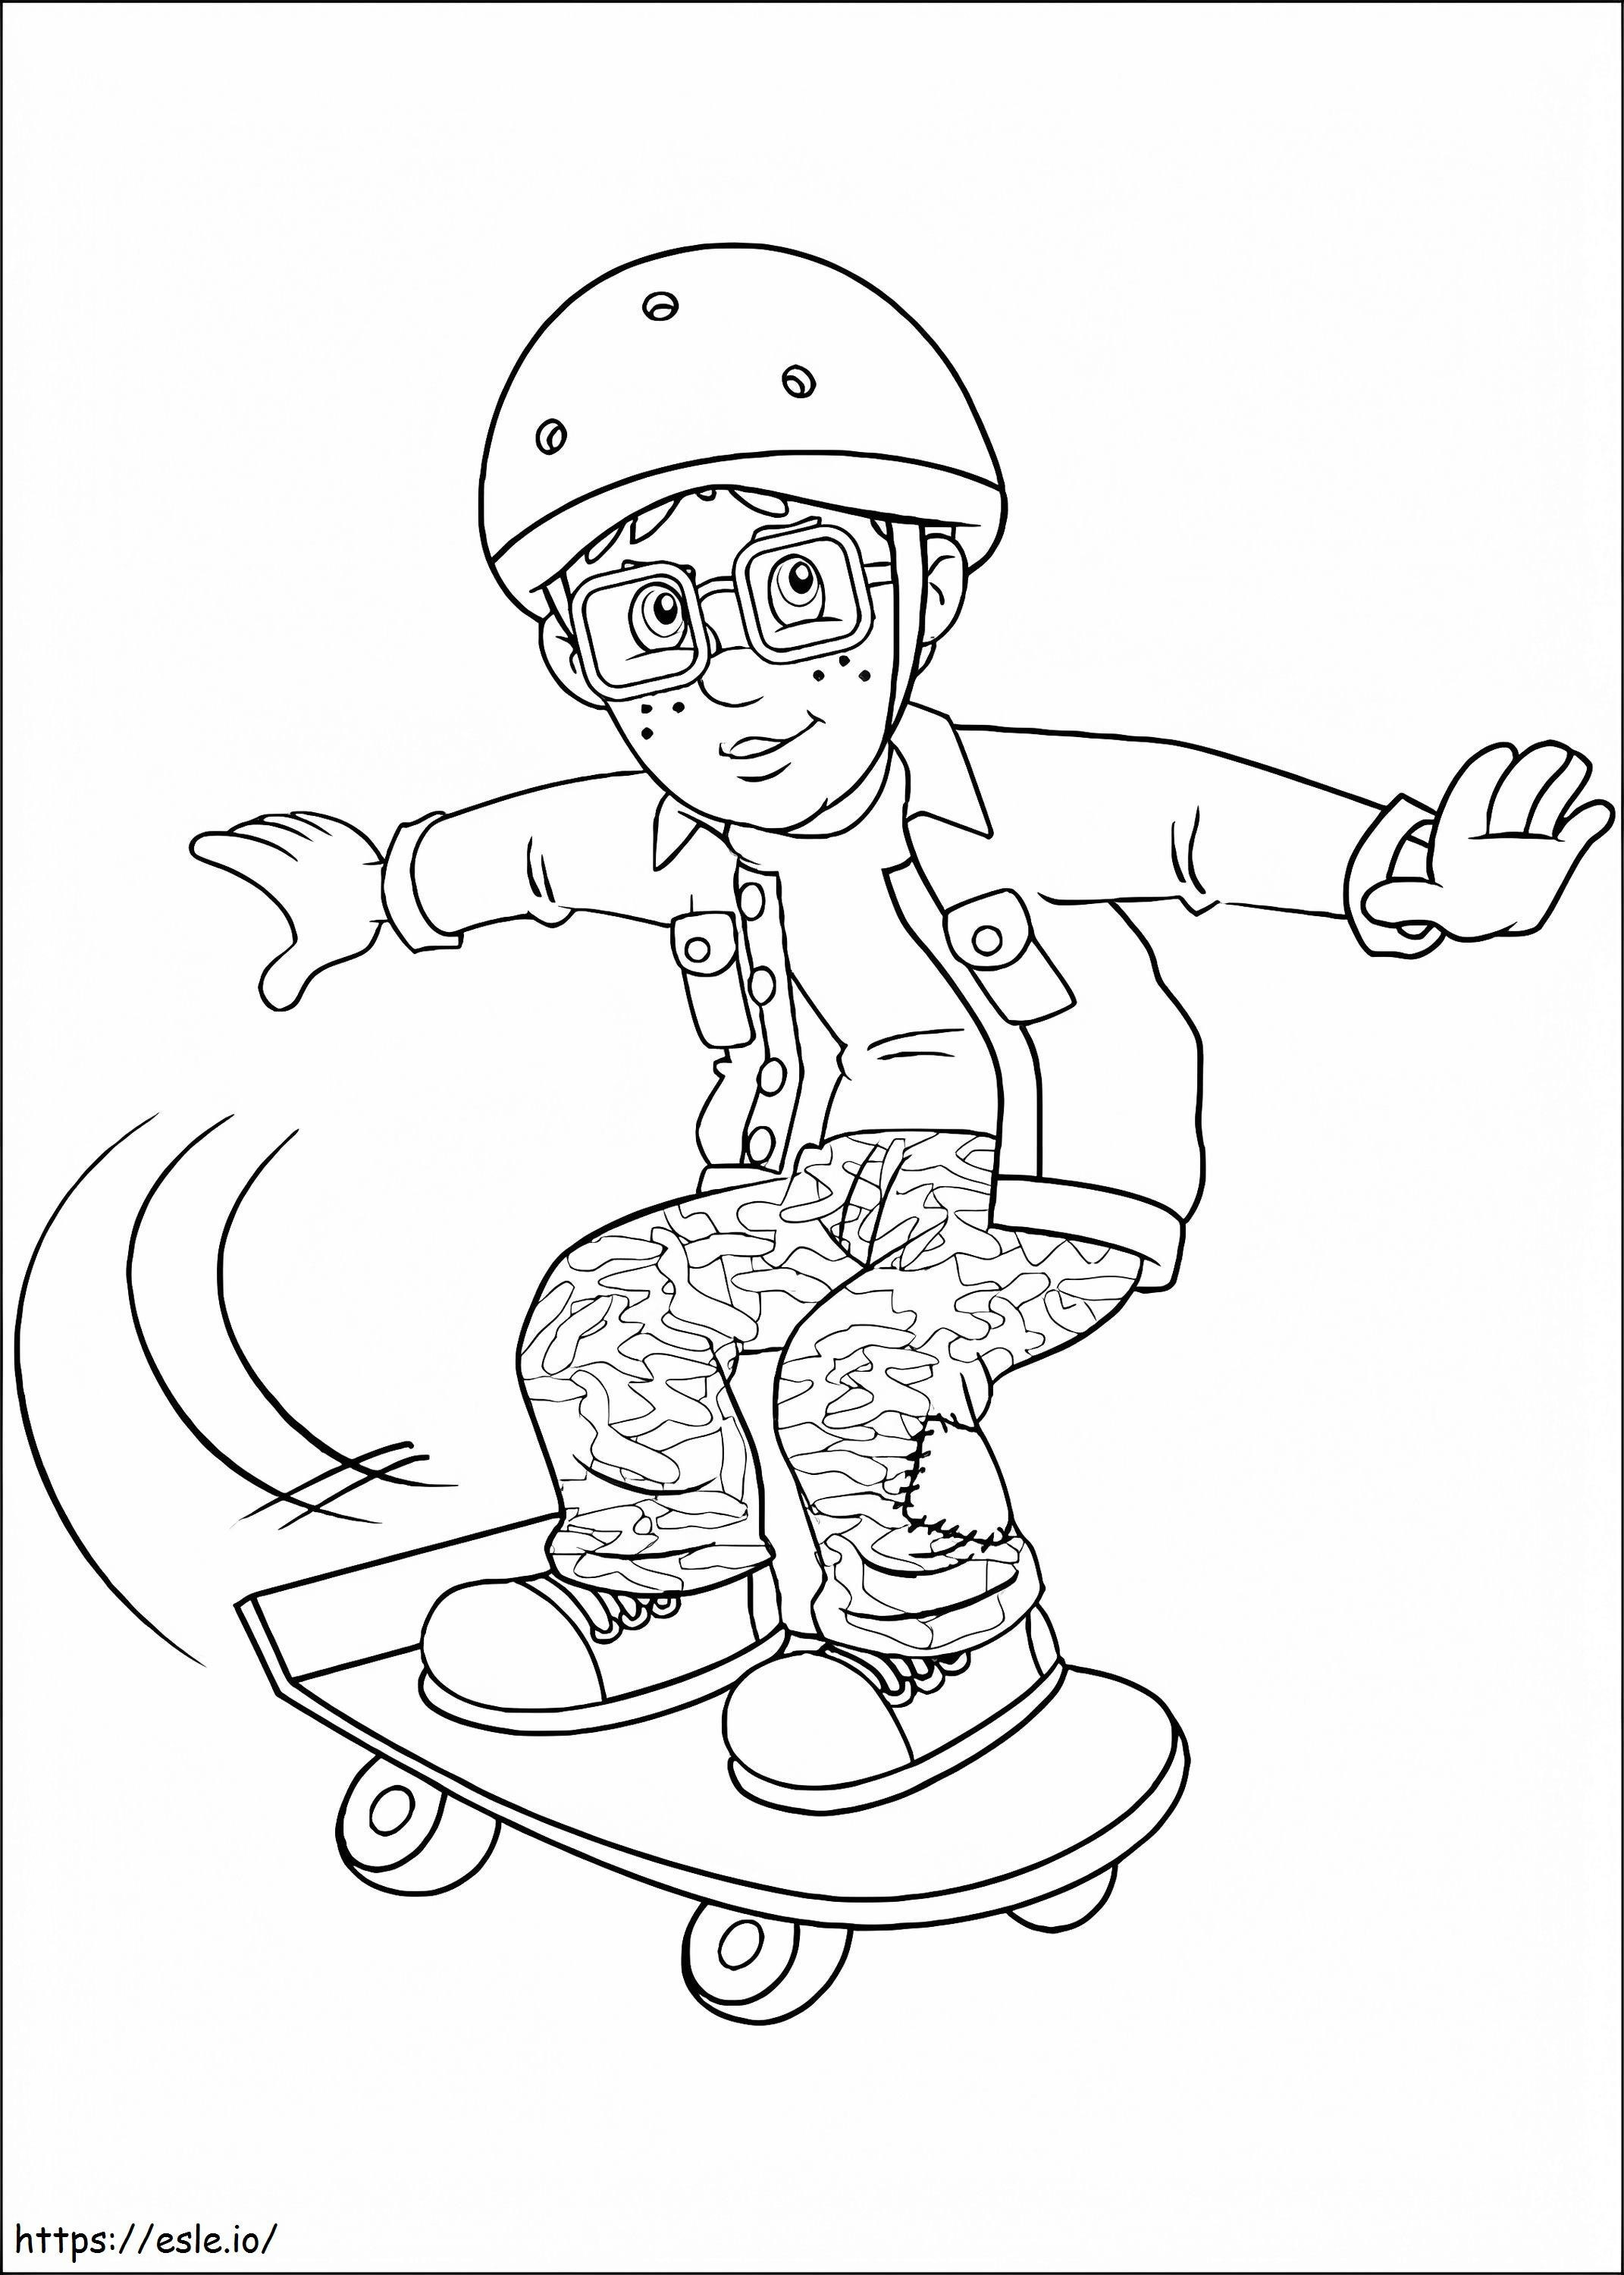 Norman Price From Fireman Sam coloring page